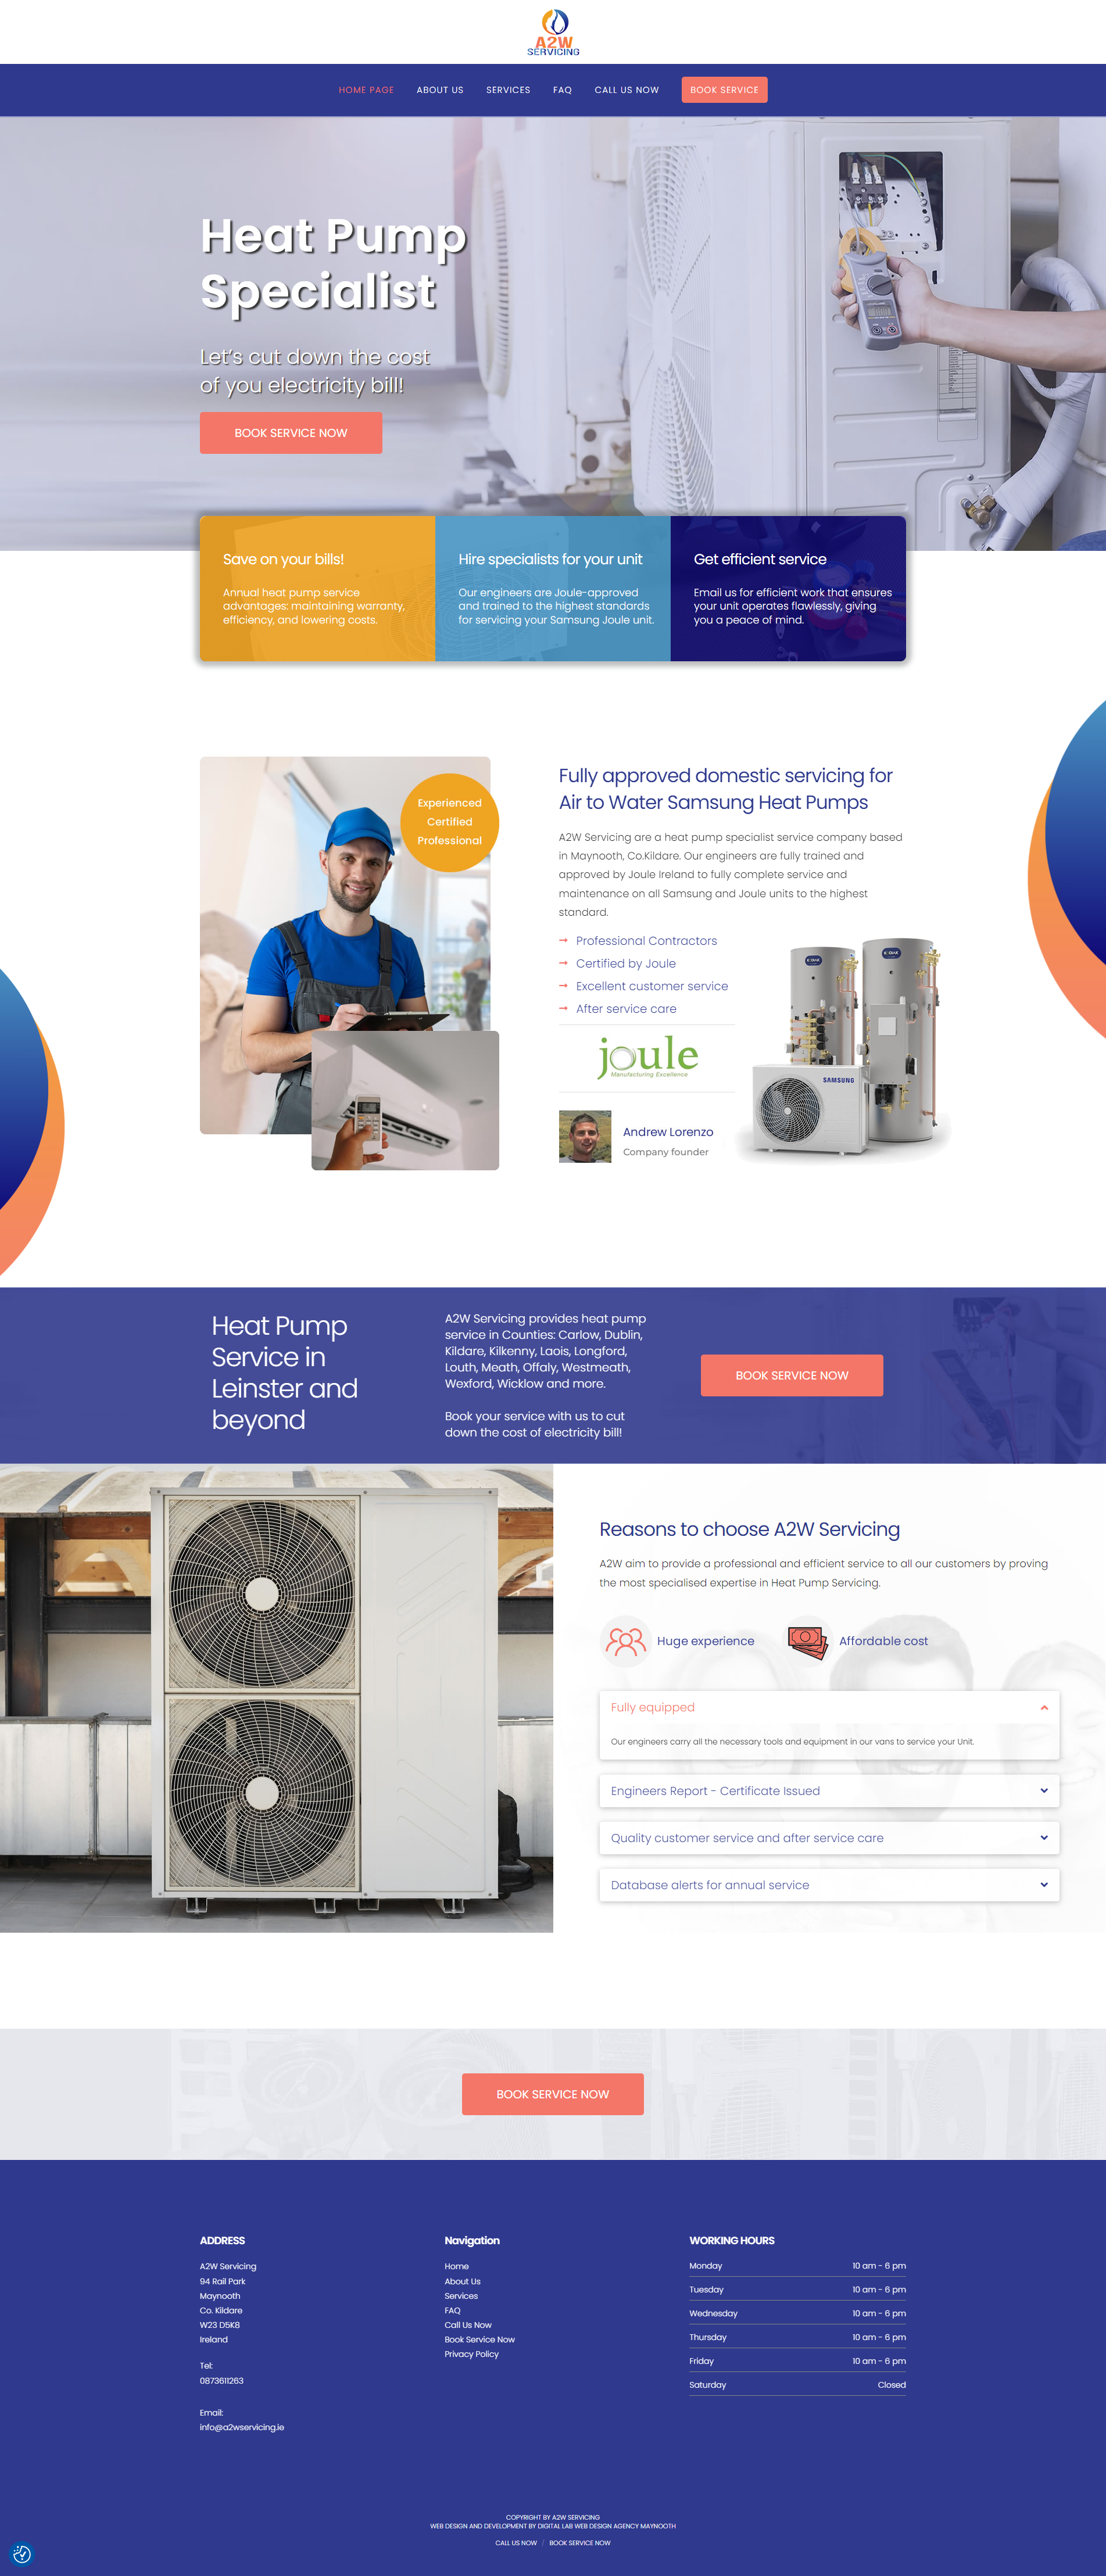 Web Design Maynooth for A2W Servicing